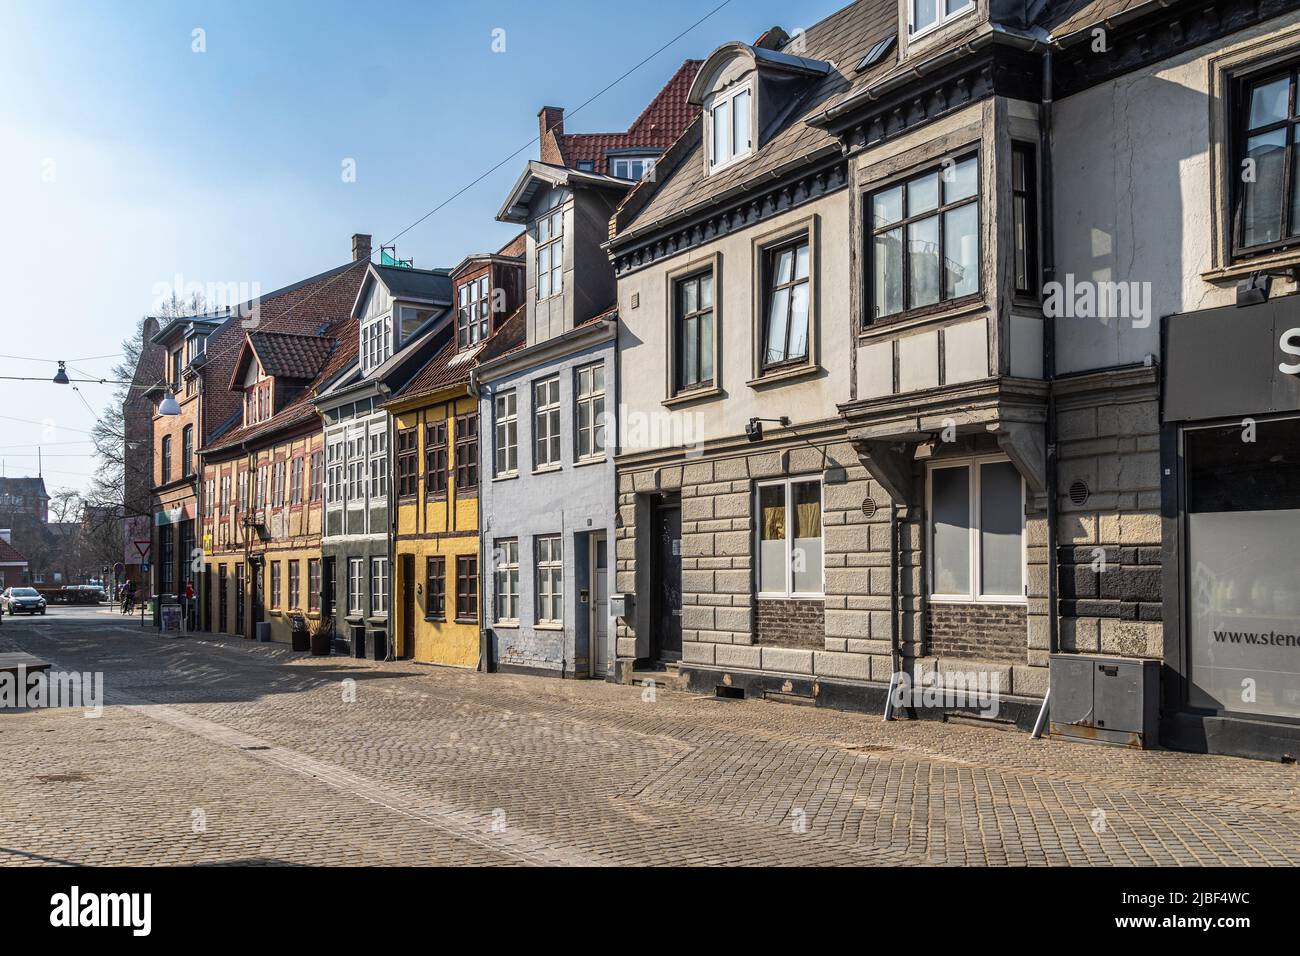 Typical Danish housing architecture. Dormers allow you to take advantage of the space under the roof with windows that catch the light.Odense, Denmark Stock Photo